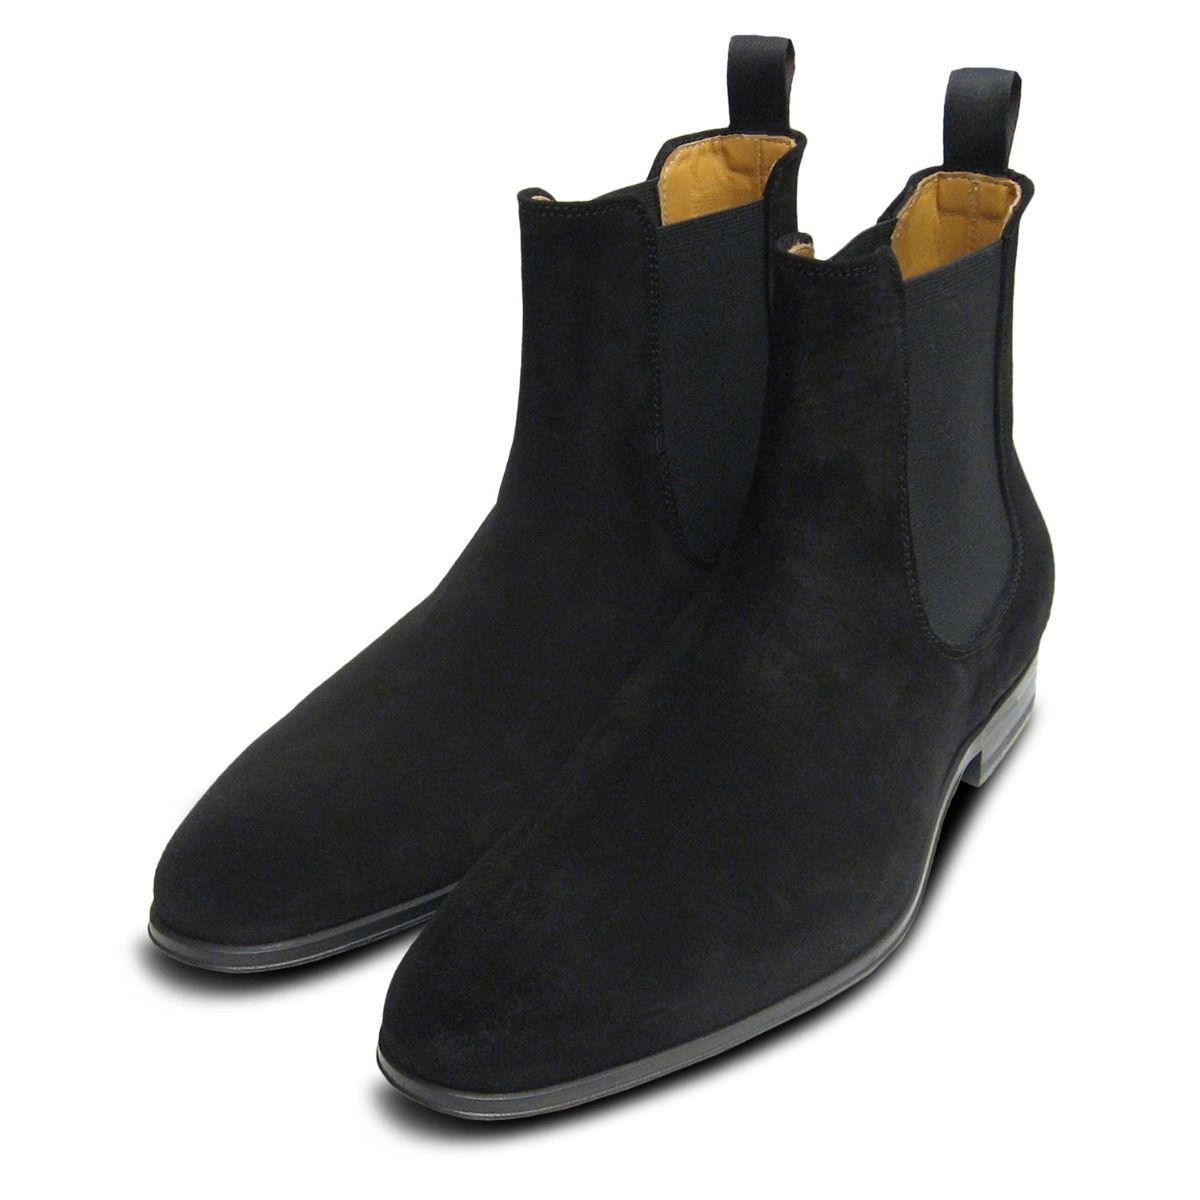 Chelsea Boots / Chelsea Boots What Makes Them Popular Oliver Cabell ...